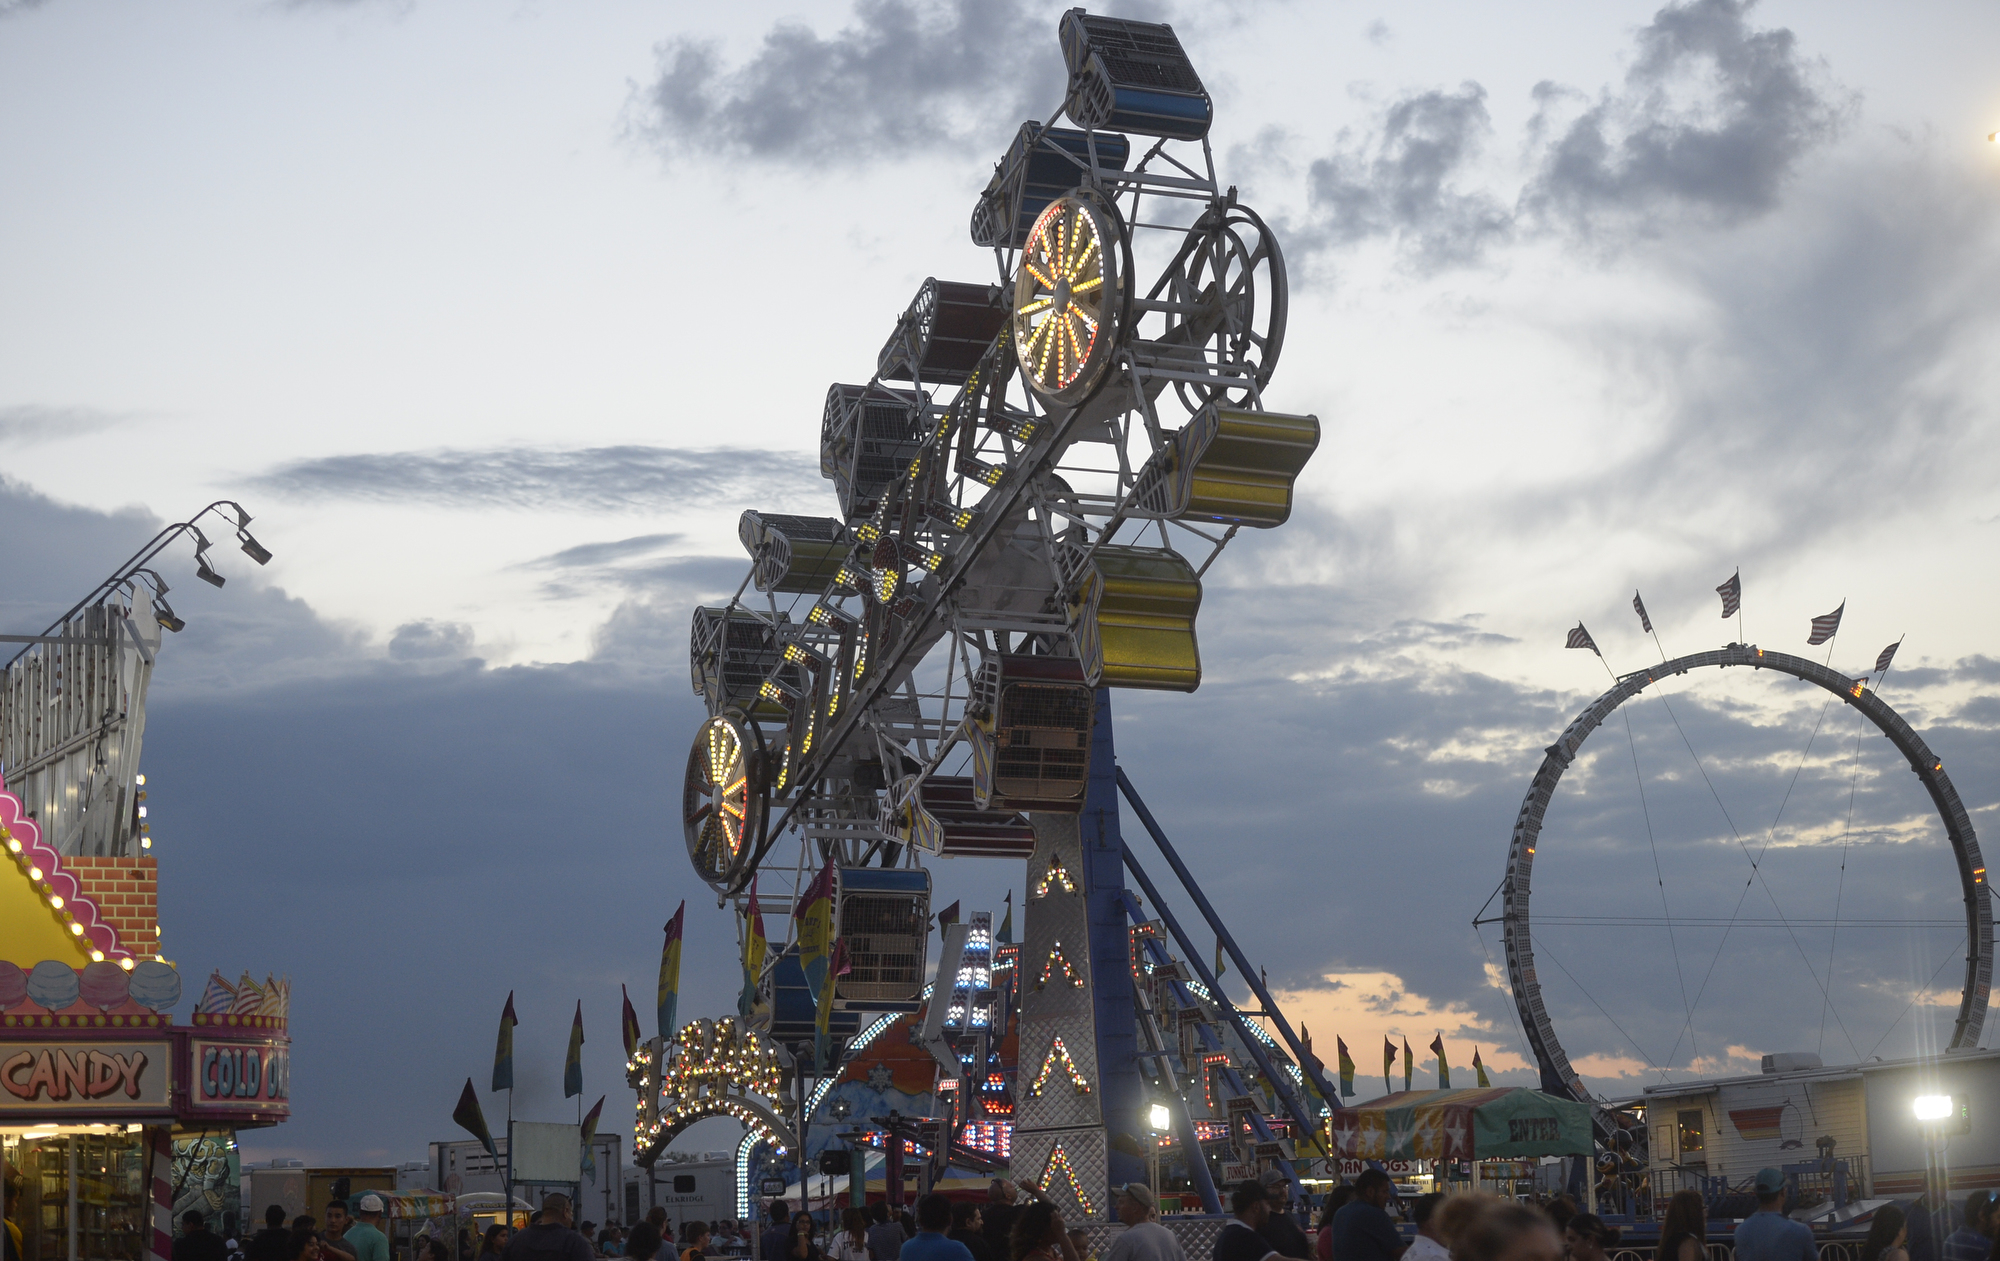 Midland County Fair grand finale will light up the night sky Midland